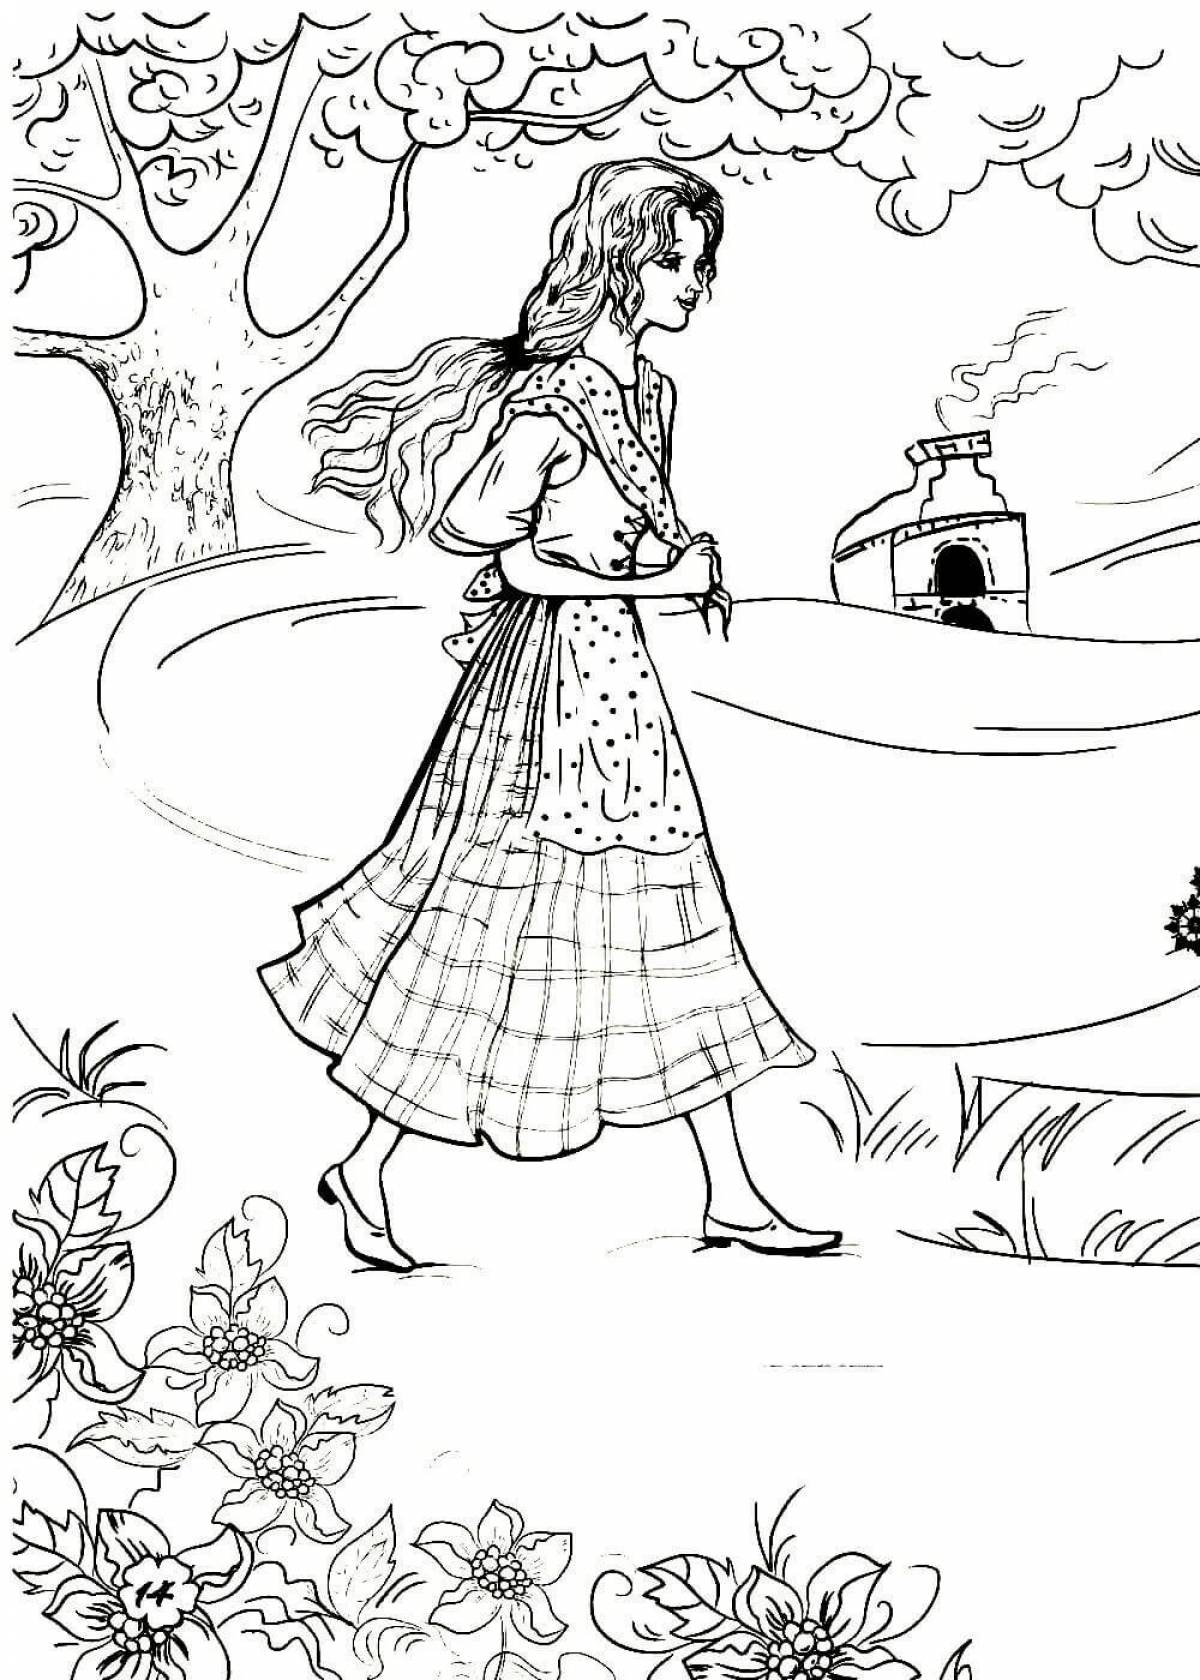 Generous lady snowstorm coloring page